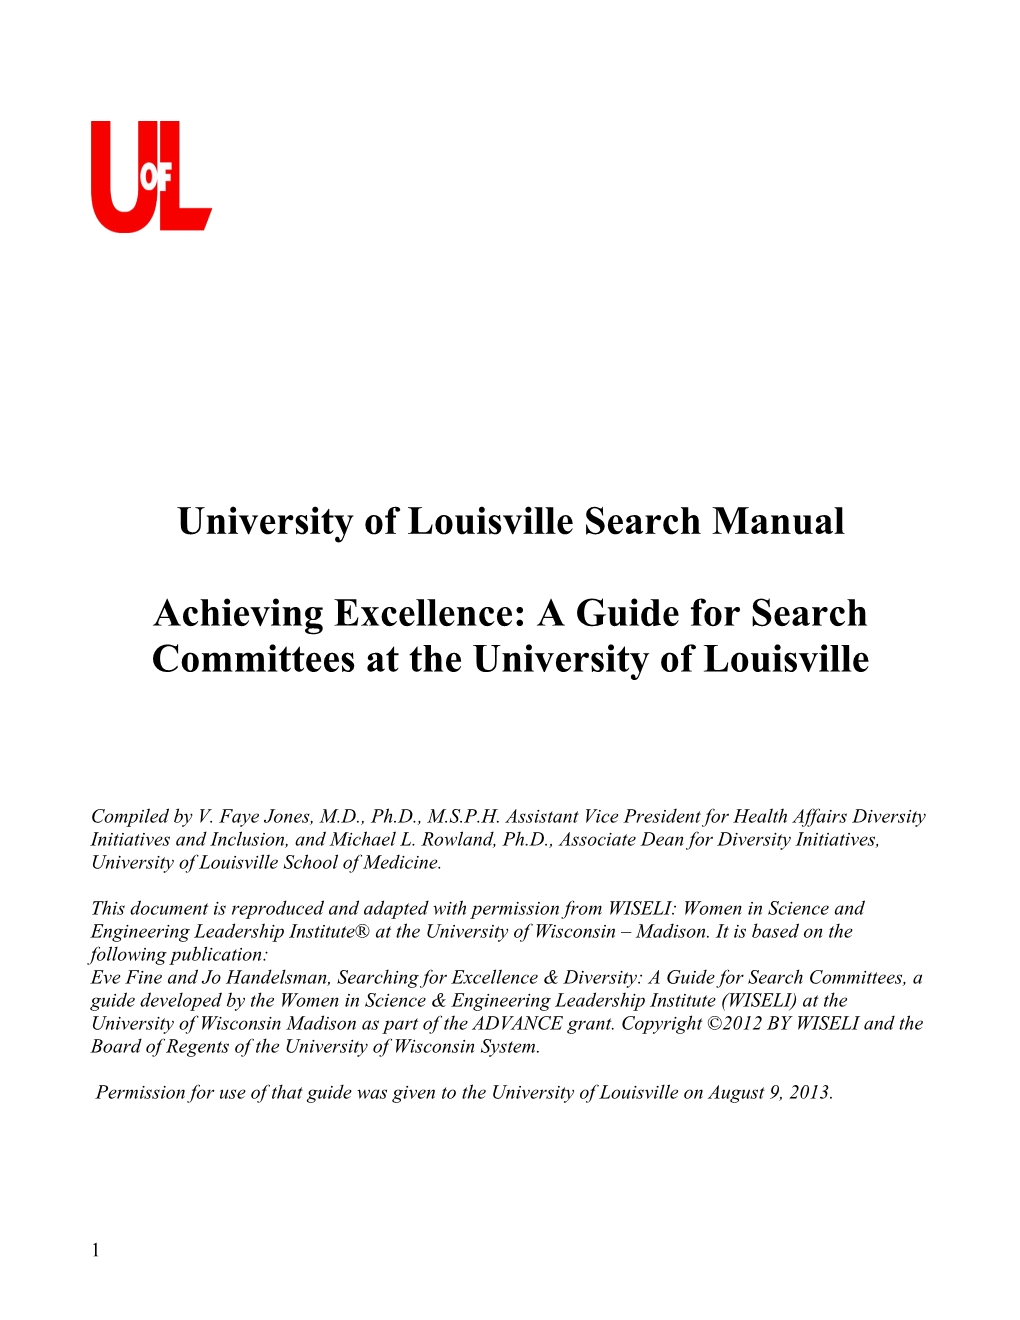 Achieving Excellence: a Guide for Search Committees at the University of Louisville